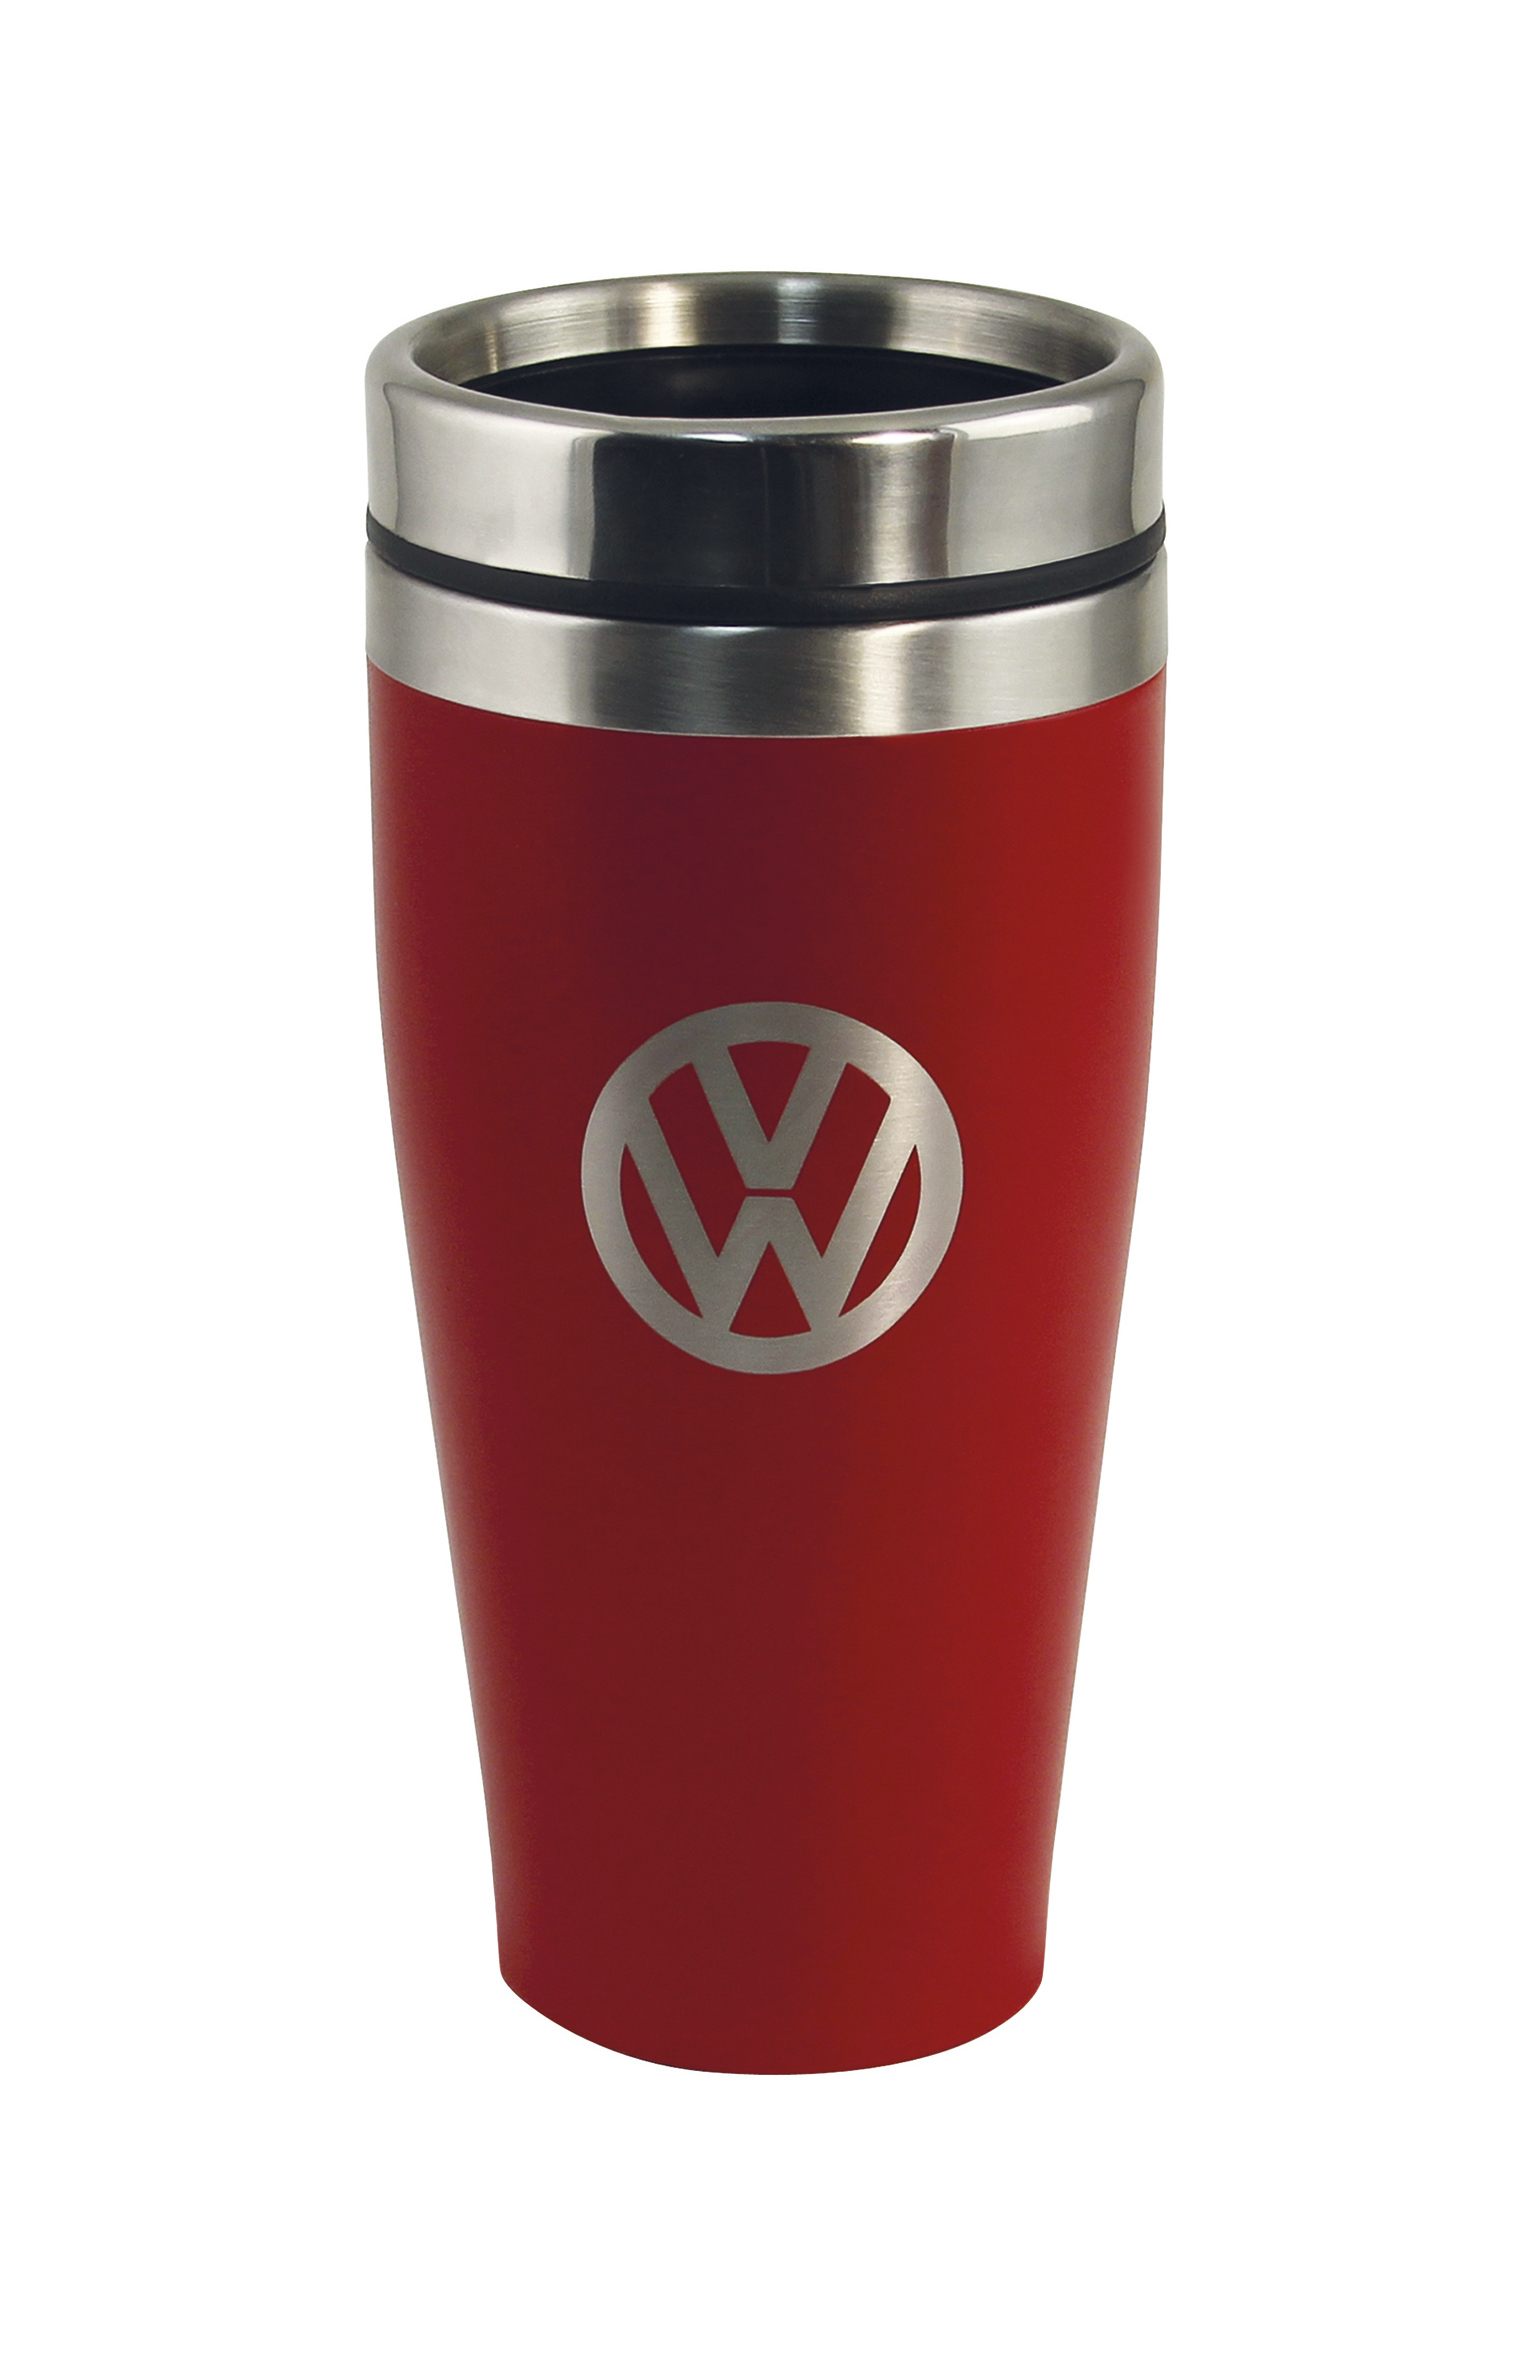 VW stainless steel thermo mug, double walled, 450ml